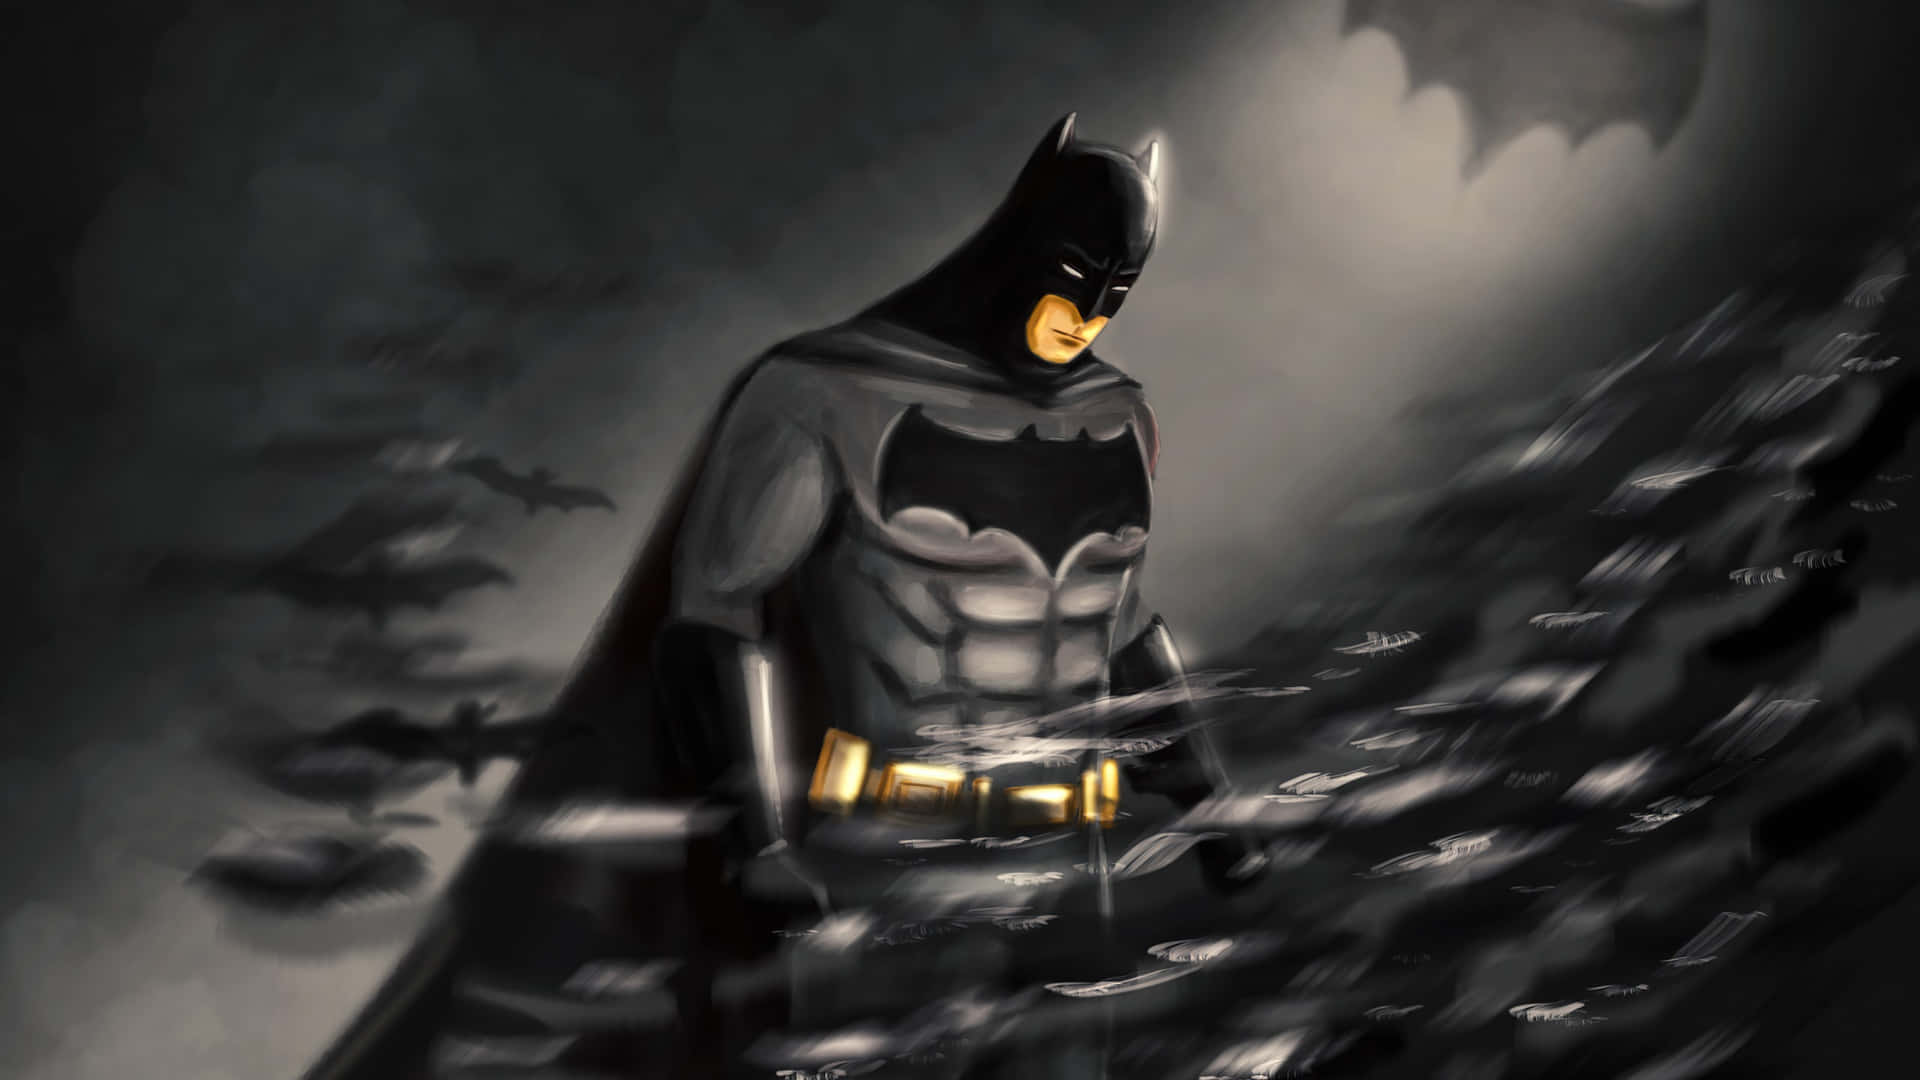 Batman spreads his wings to fight evil Wallpaper